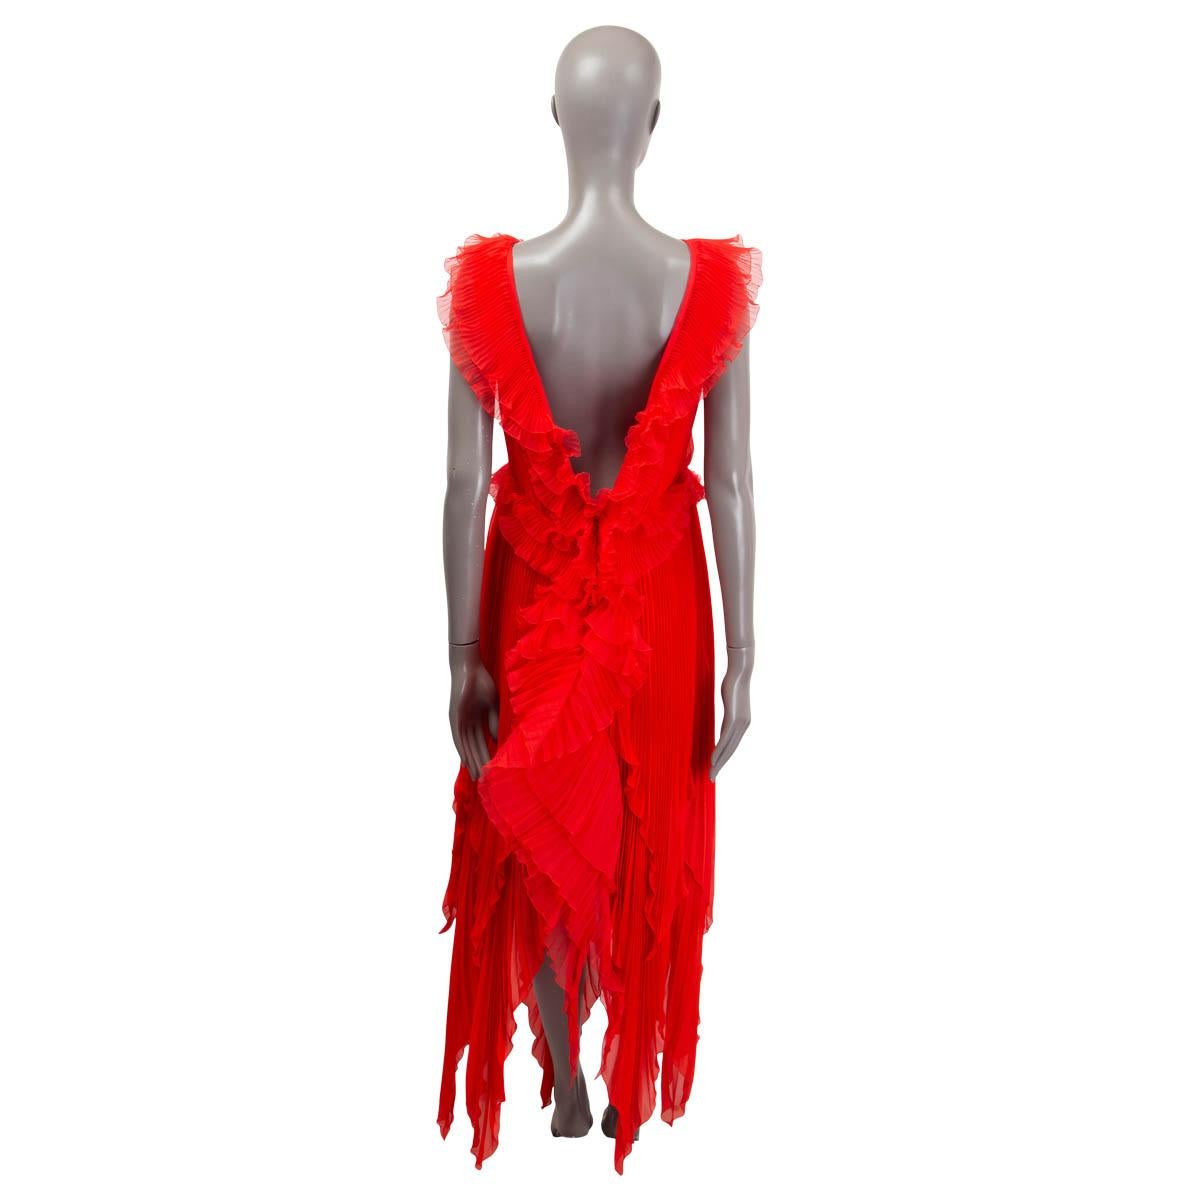 GIVENCHY rotes Seidenkleid 2018 RUFFLE TRIM PLEATED EVENING Kleid 42 M (Rot) im Angebot